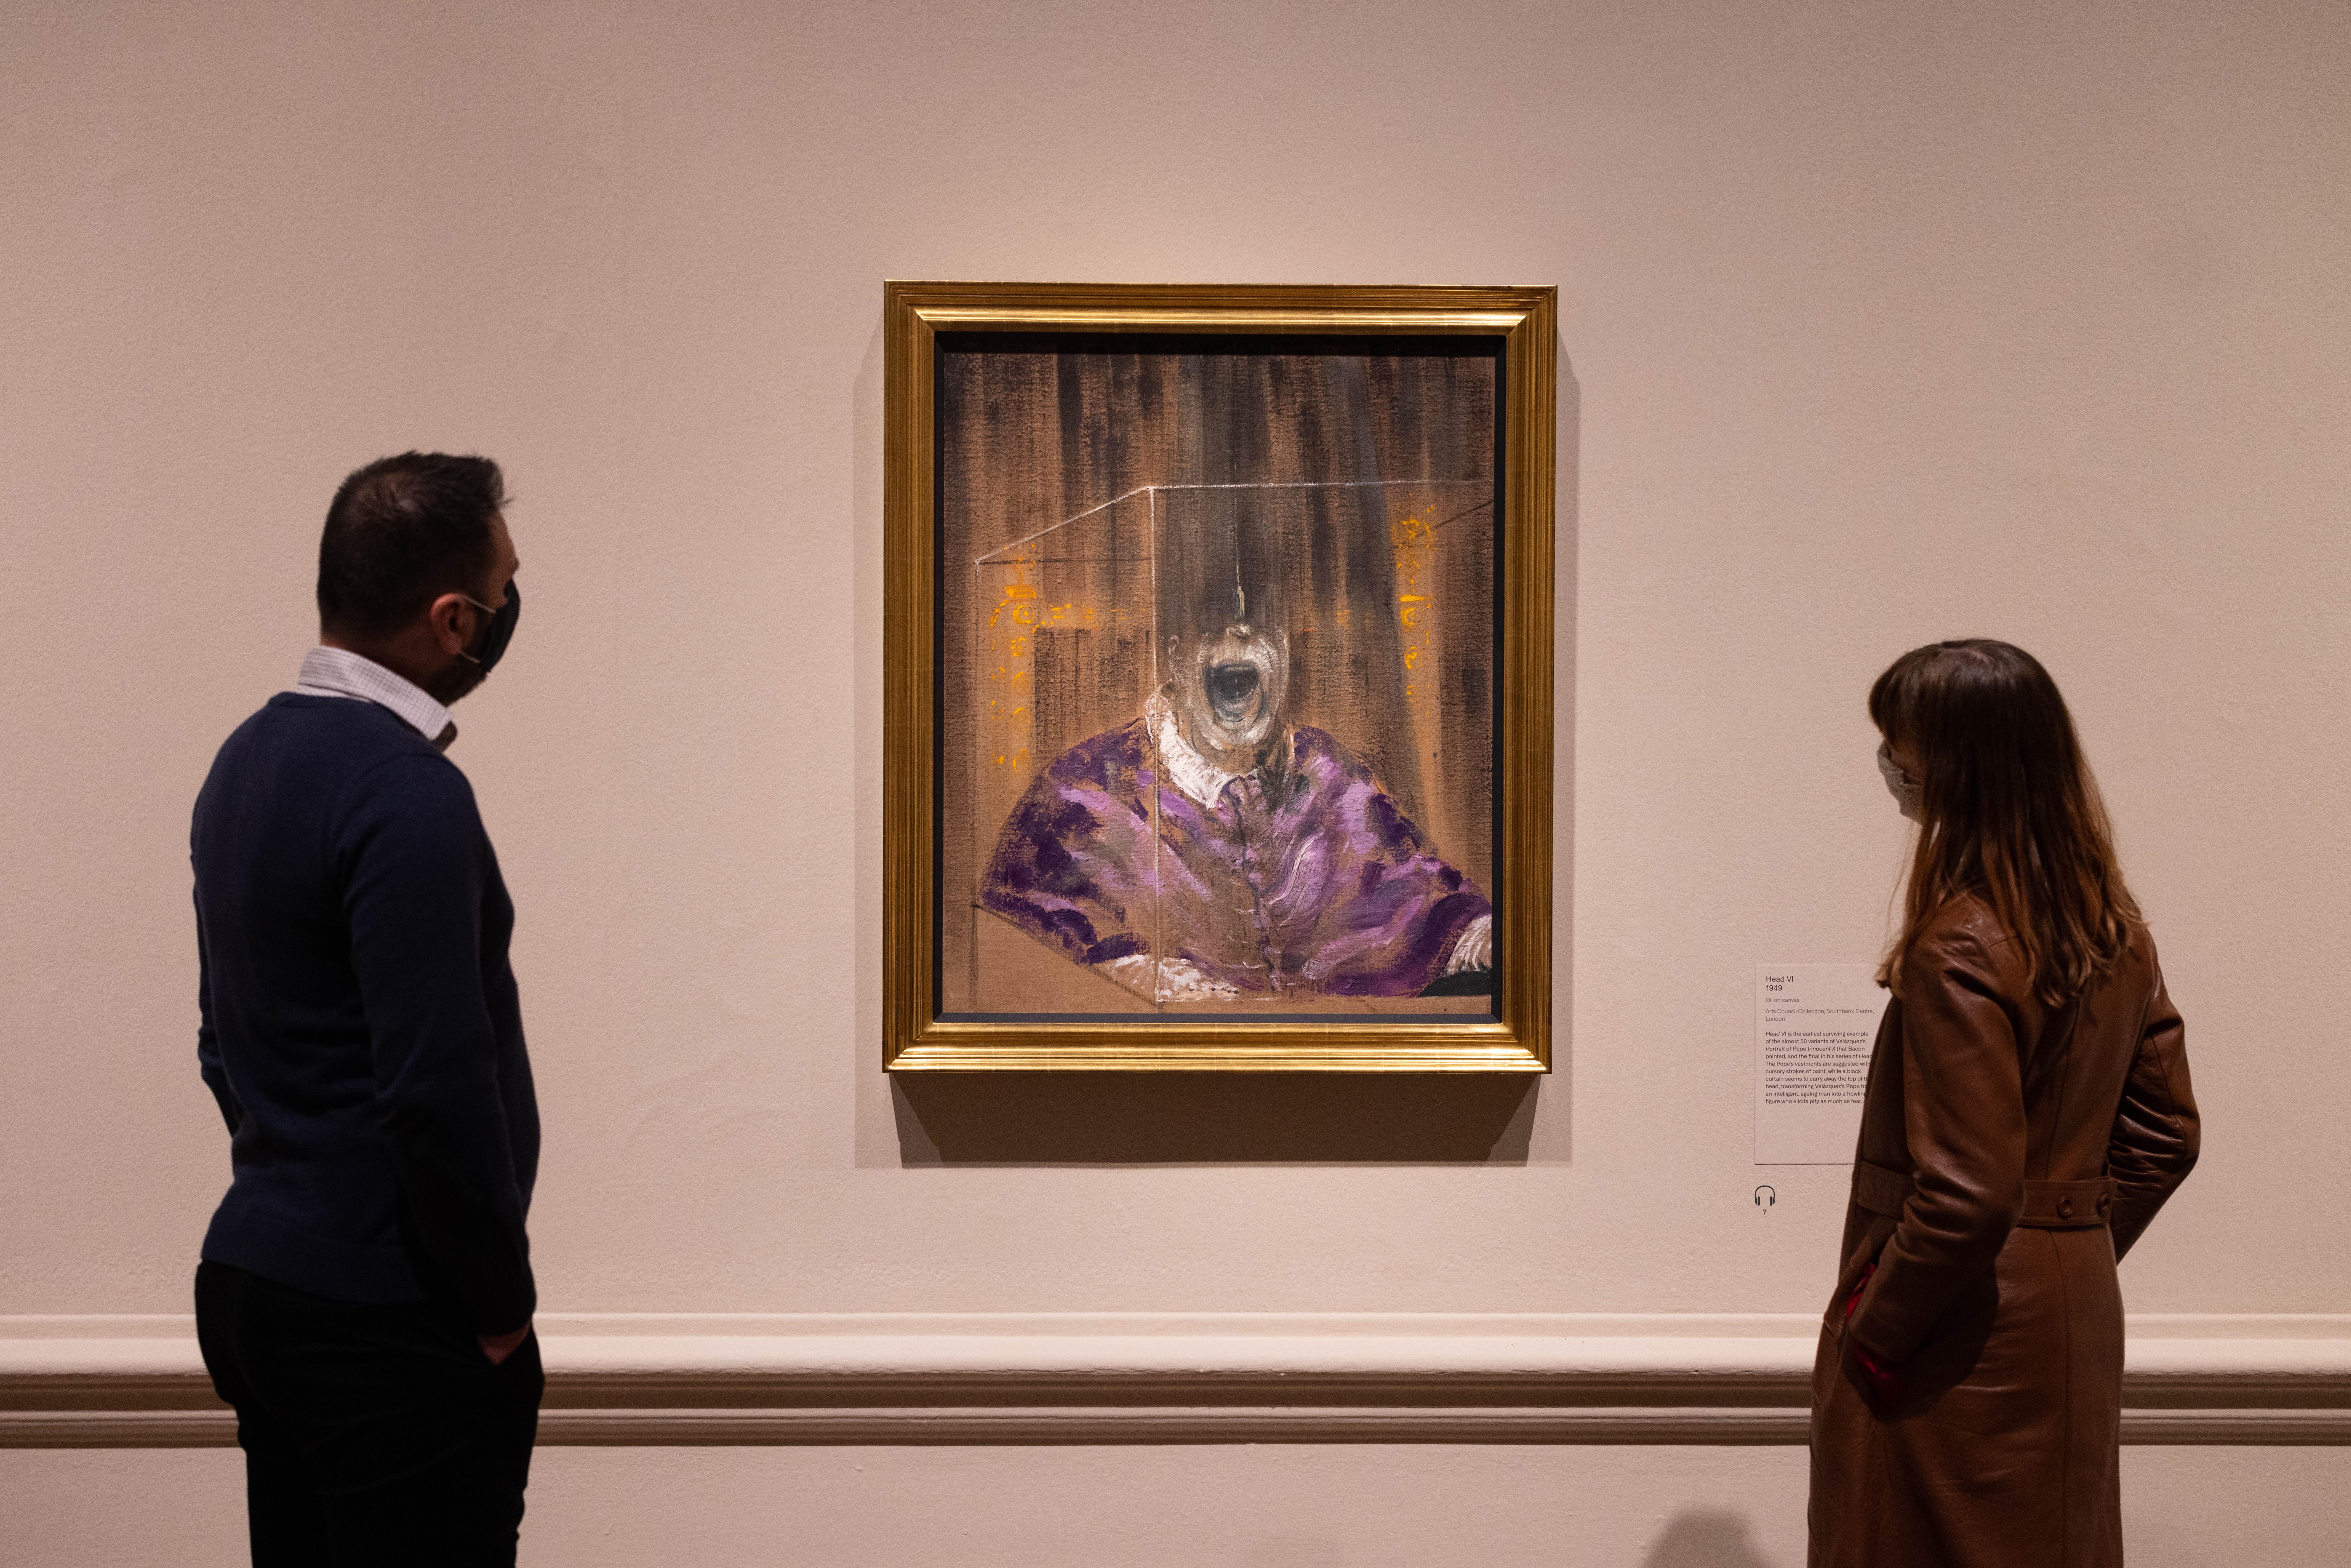 Installation view of the ‘Francis Bacon: Man and Beast’ exhibition at the Royal